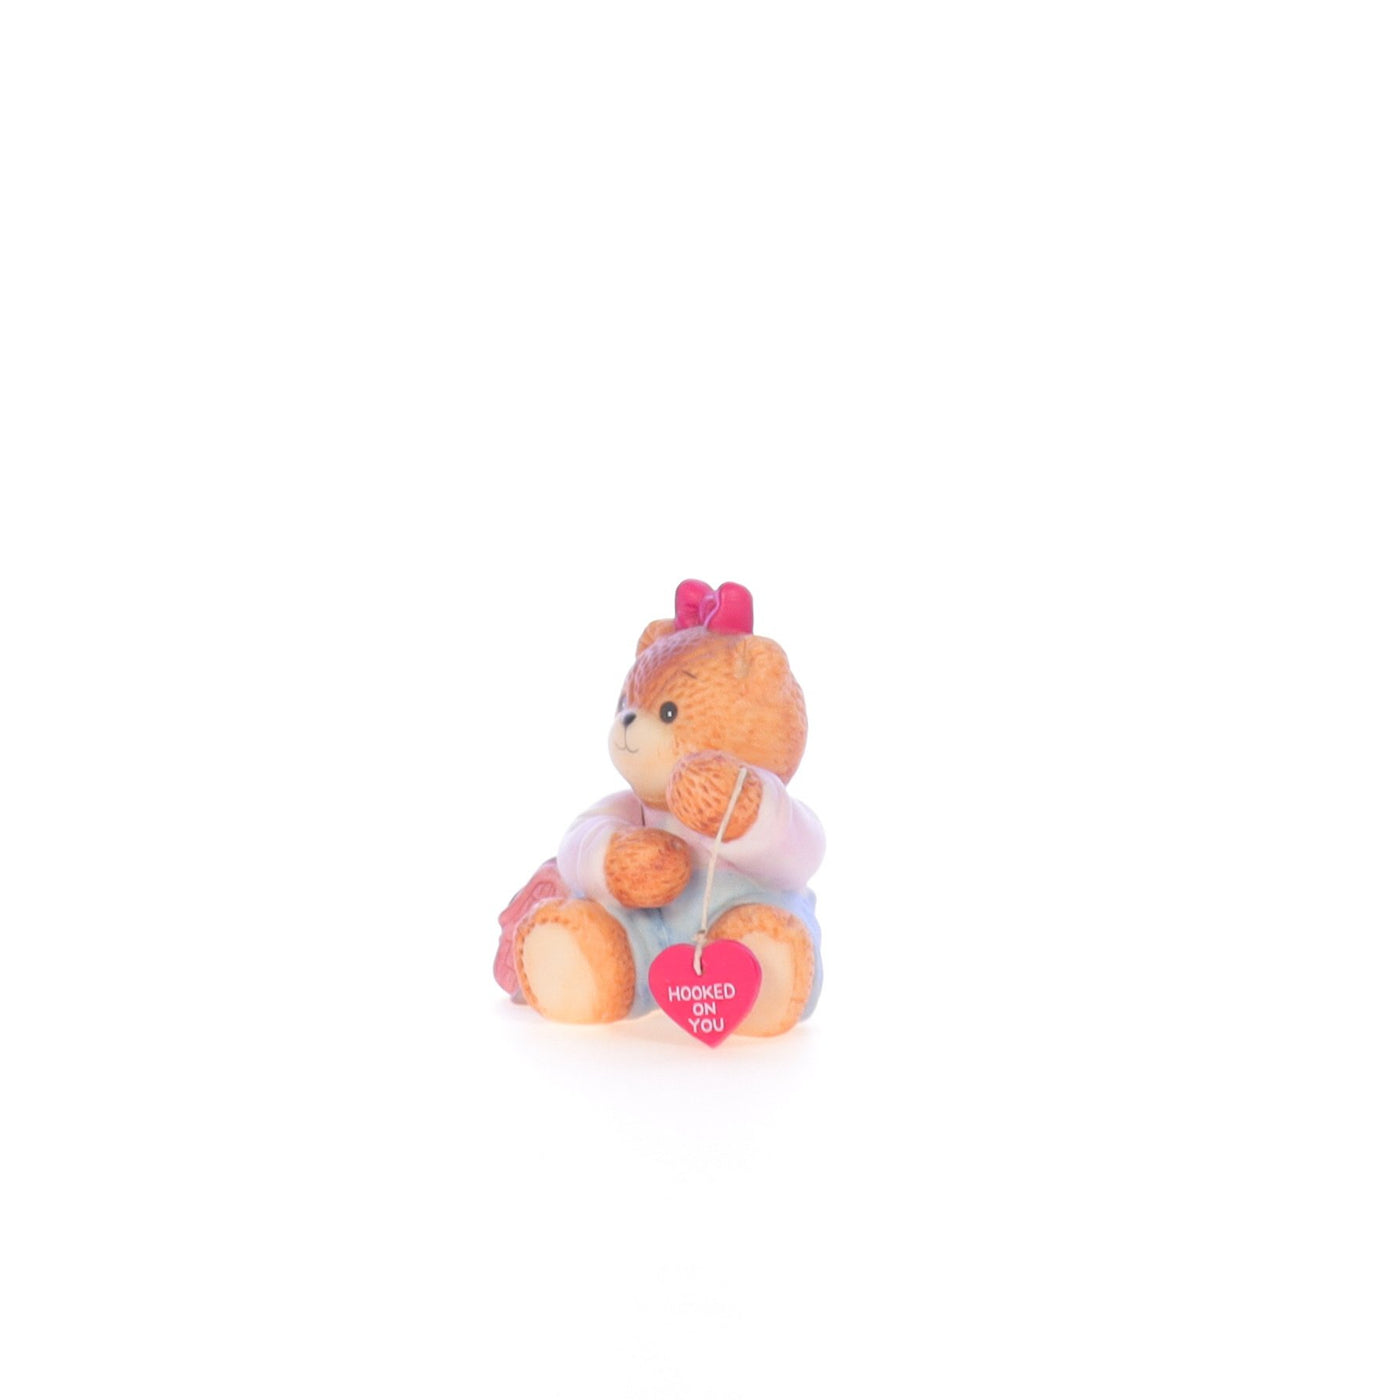 Lucy_And_Me_by_Lucy_Atwell_Porcelain_Figurine_Girl_Bear_with_Valentine_Lucy_Unknown_079_02